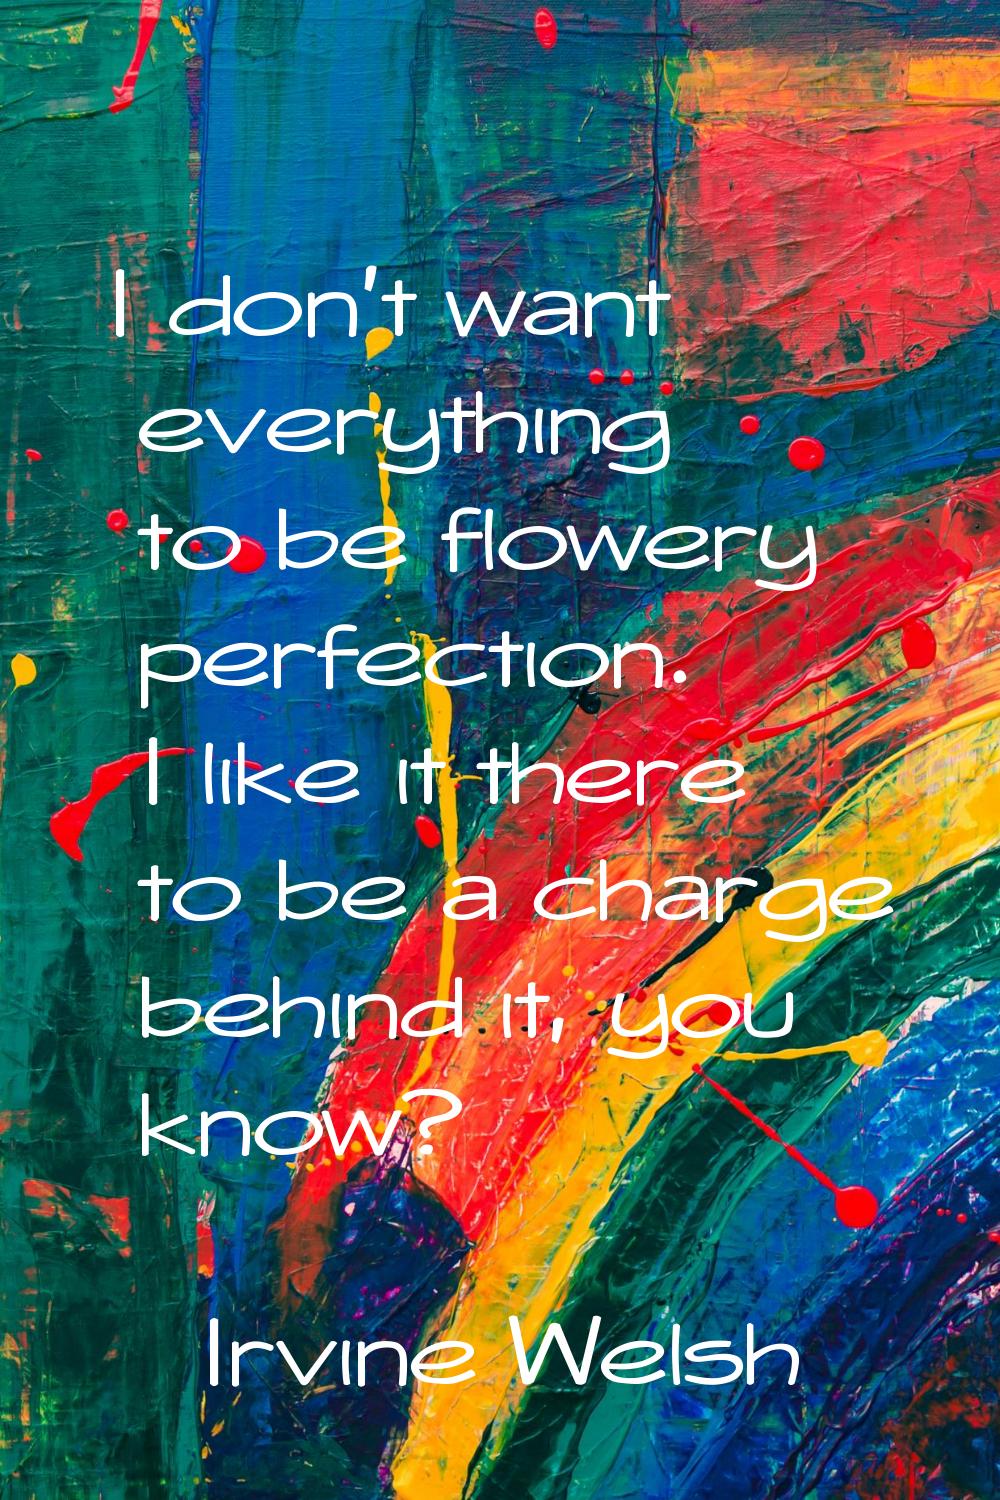 I don't want everything to be flowery perfection. I like it there to be a charge behind it, you kno